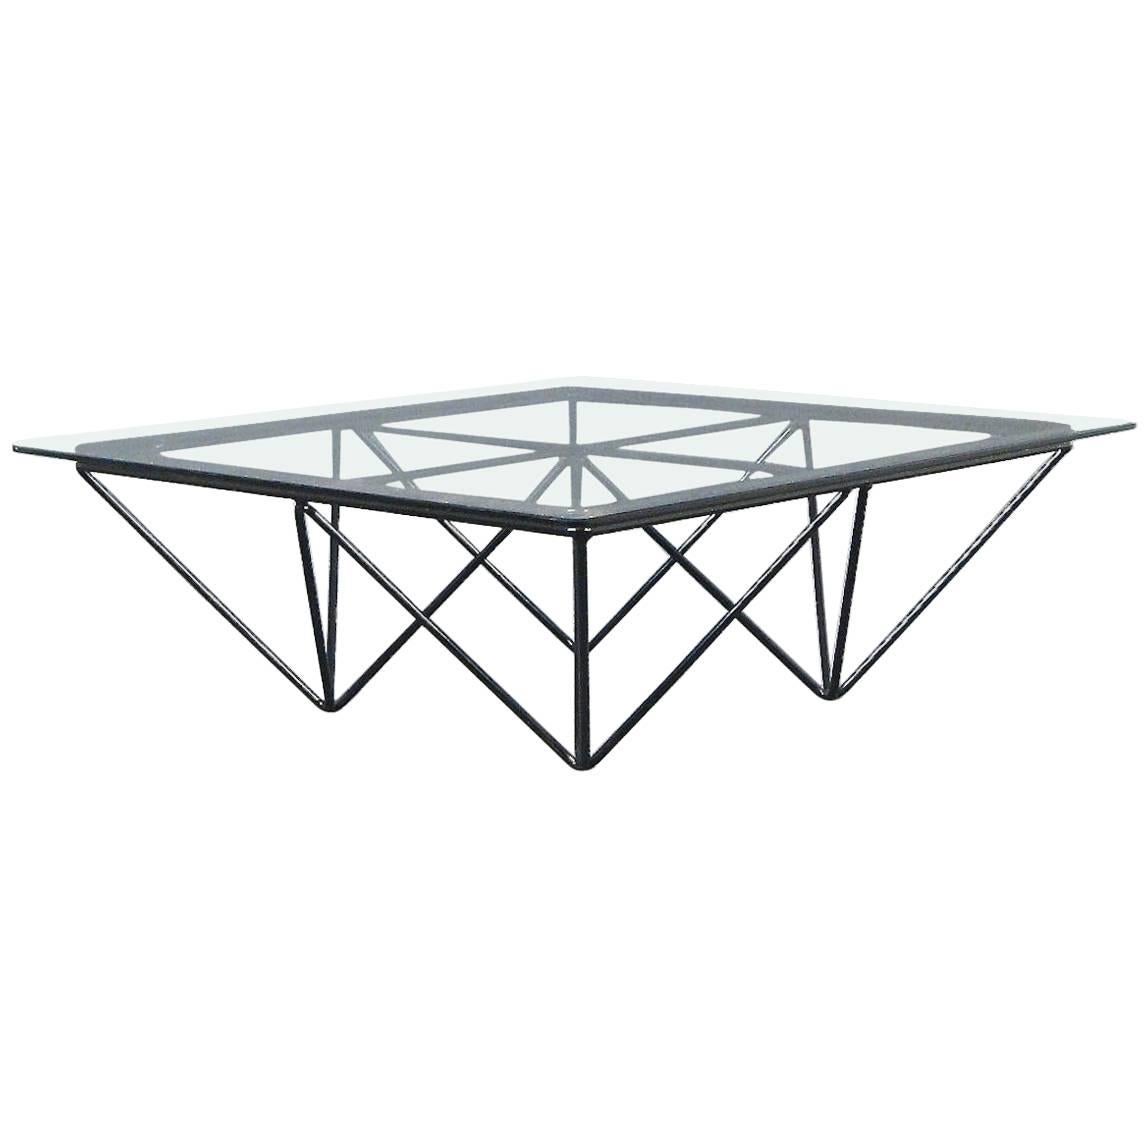 Square Glass Coffee Table in the Style of Paolo Piva's "Alanda" Table